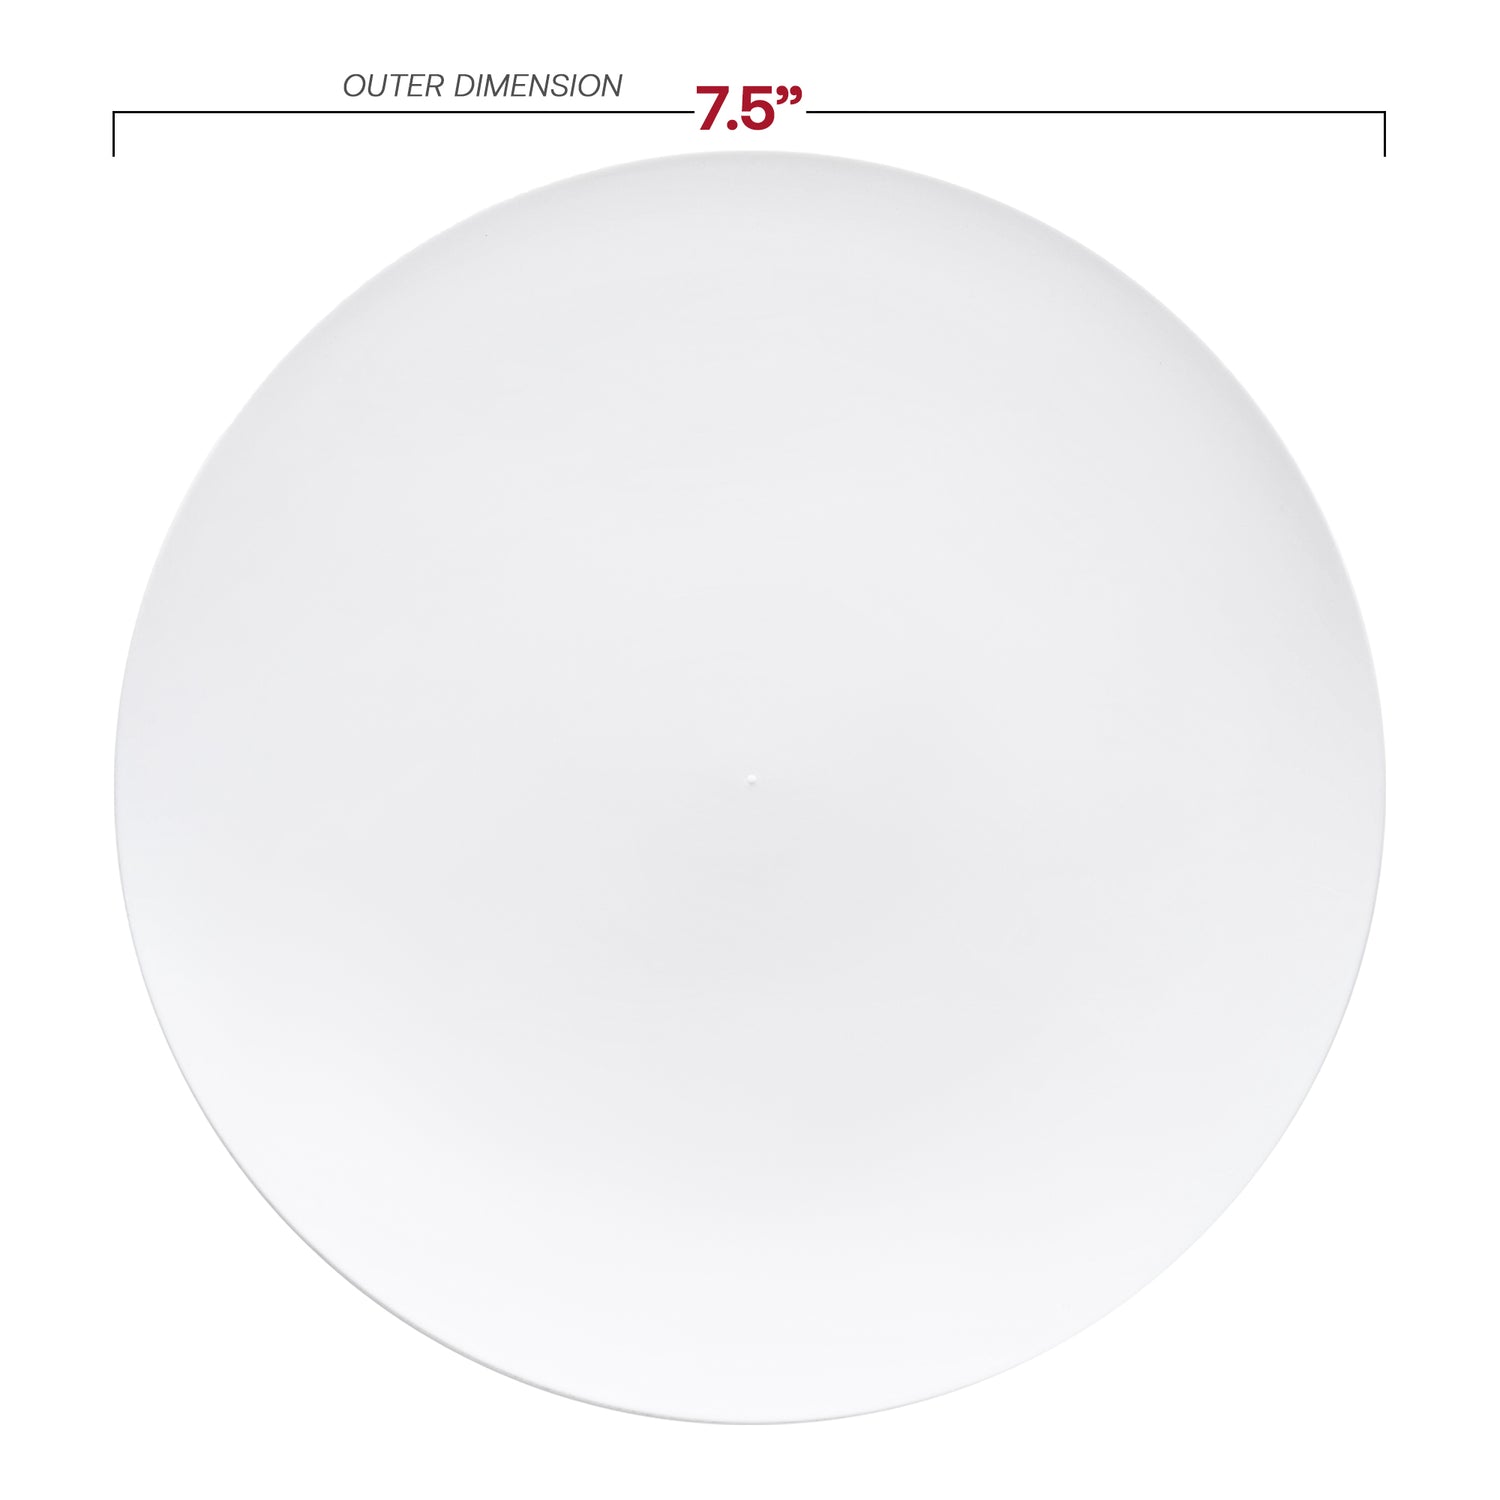 Solid White Organic Round Disposable Plastic Appetizer/Salad Plates (7.5") Dimension | The Kaya Collection